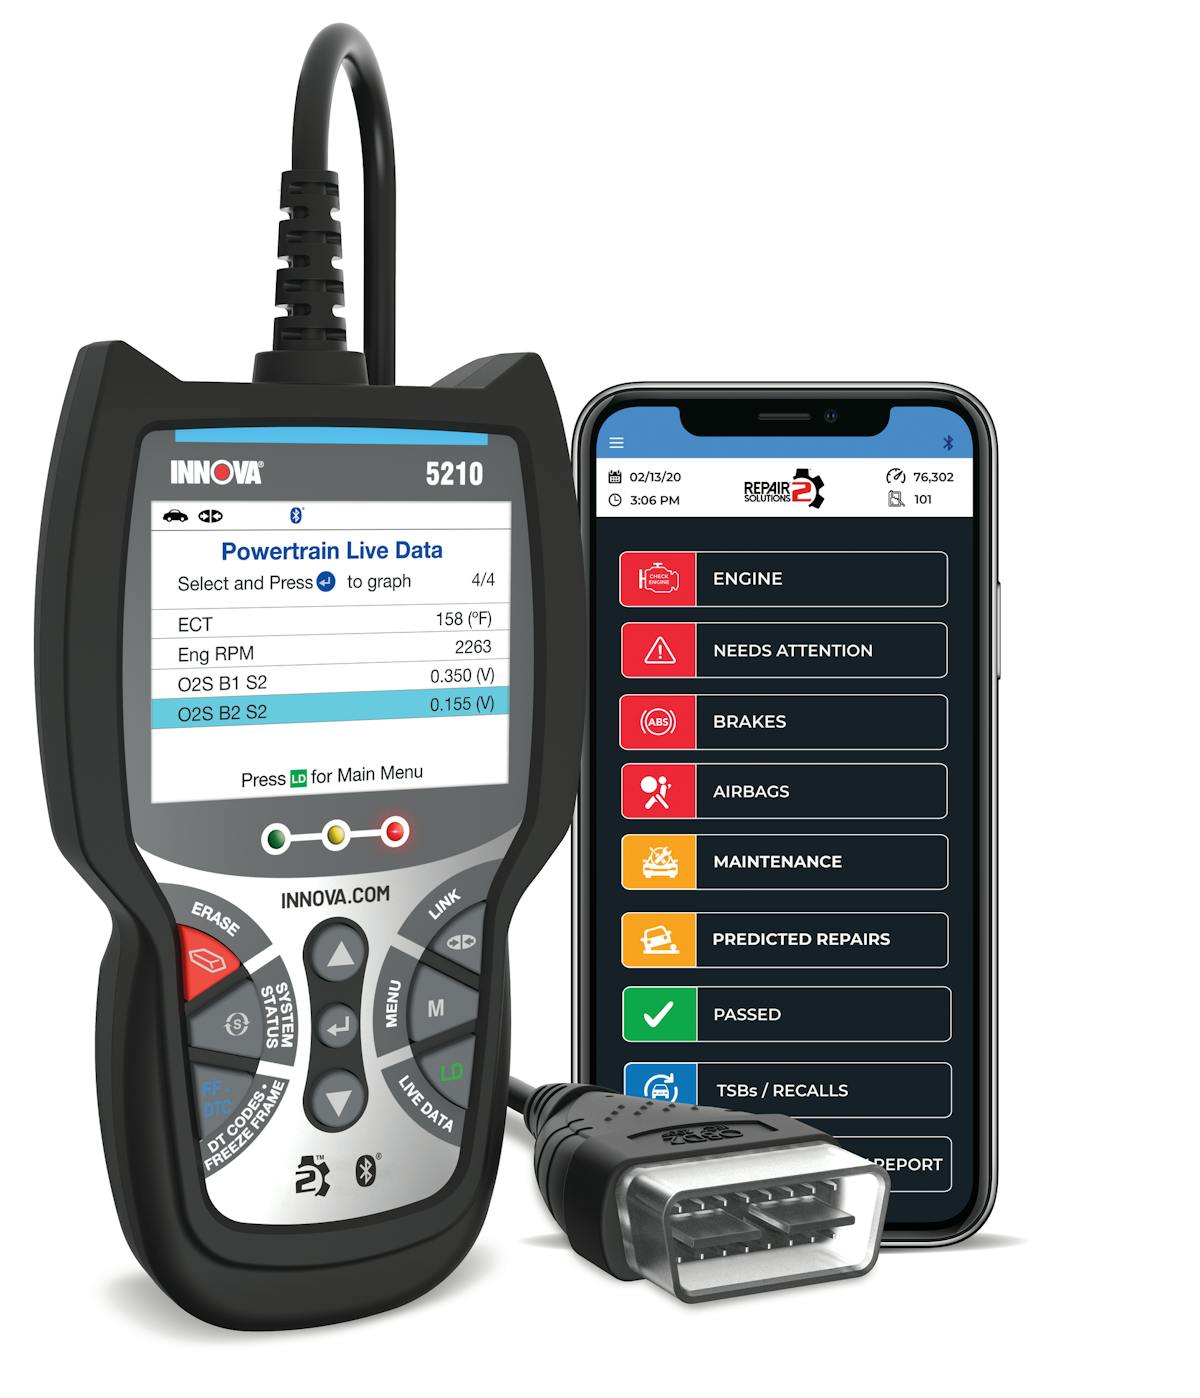 The Innova CarScan Advisor, No. 5210, is an entry-level OBD-II scan tool that provides live data, through its all-in-one color display.